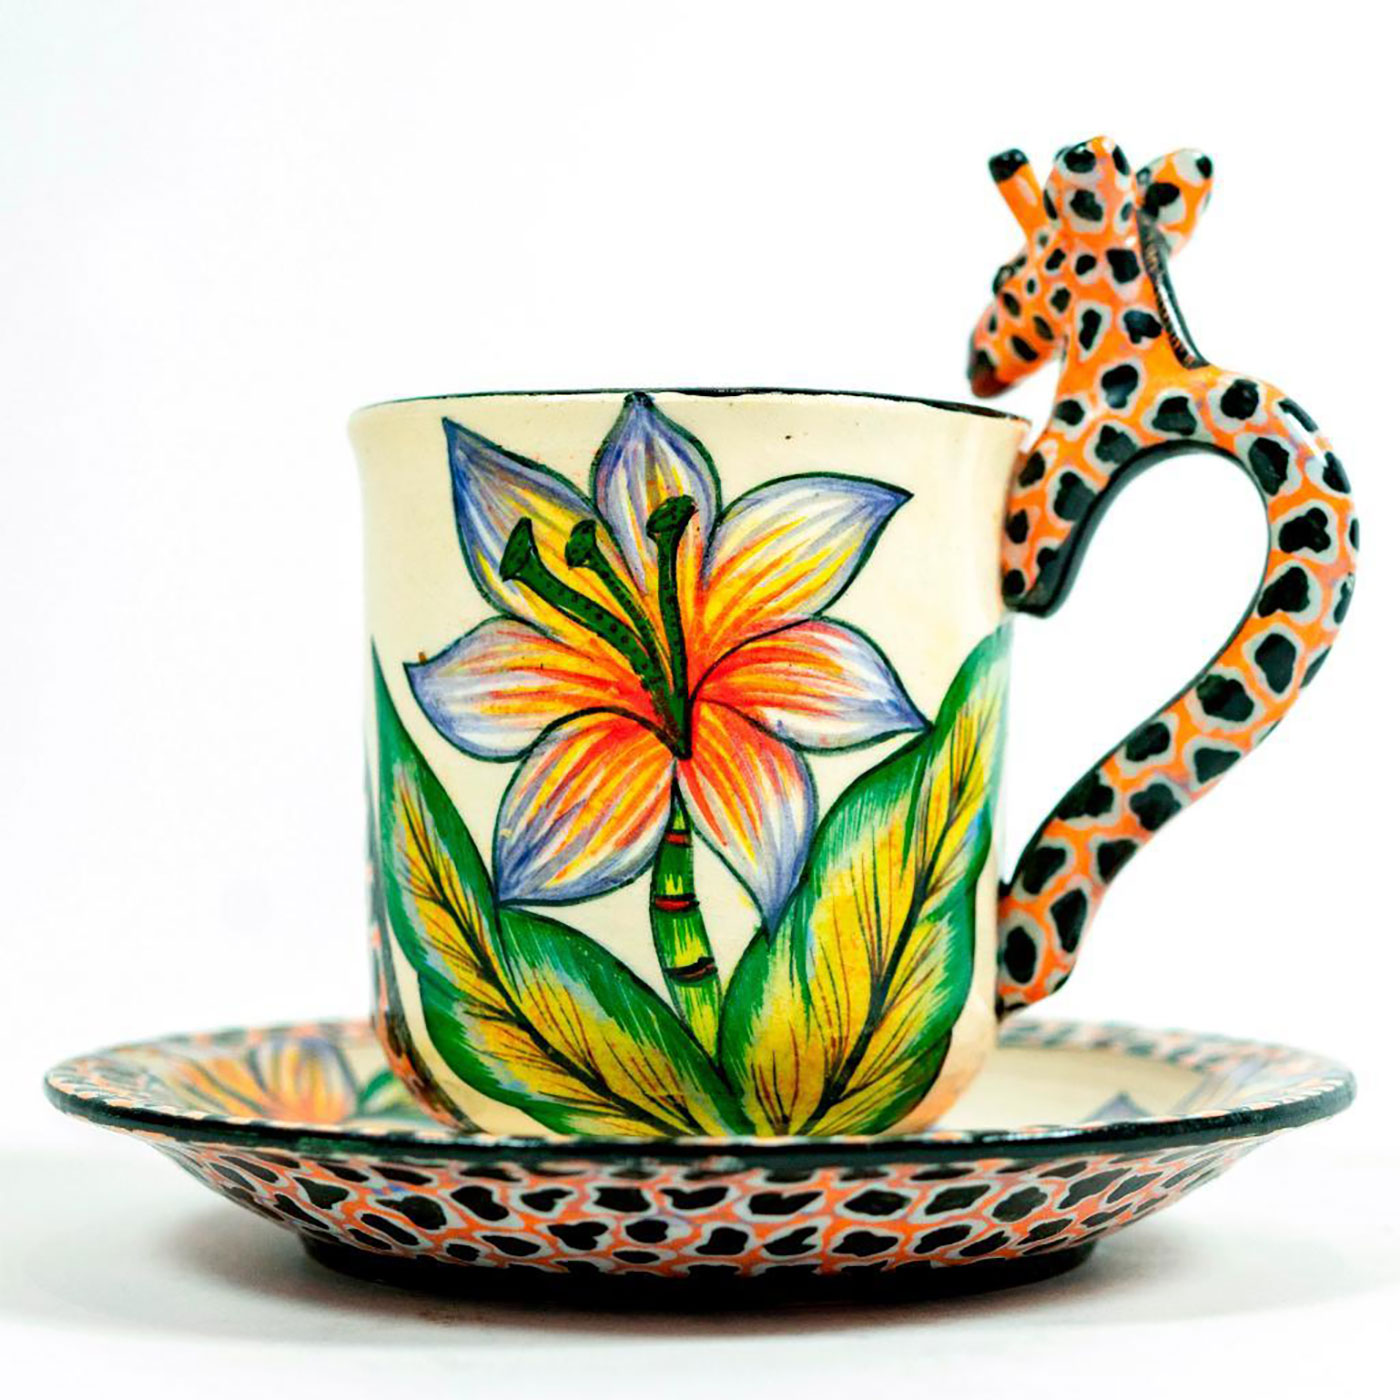 Ardmore Studio Espresso Cup and Saucer - Image 2 of 6